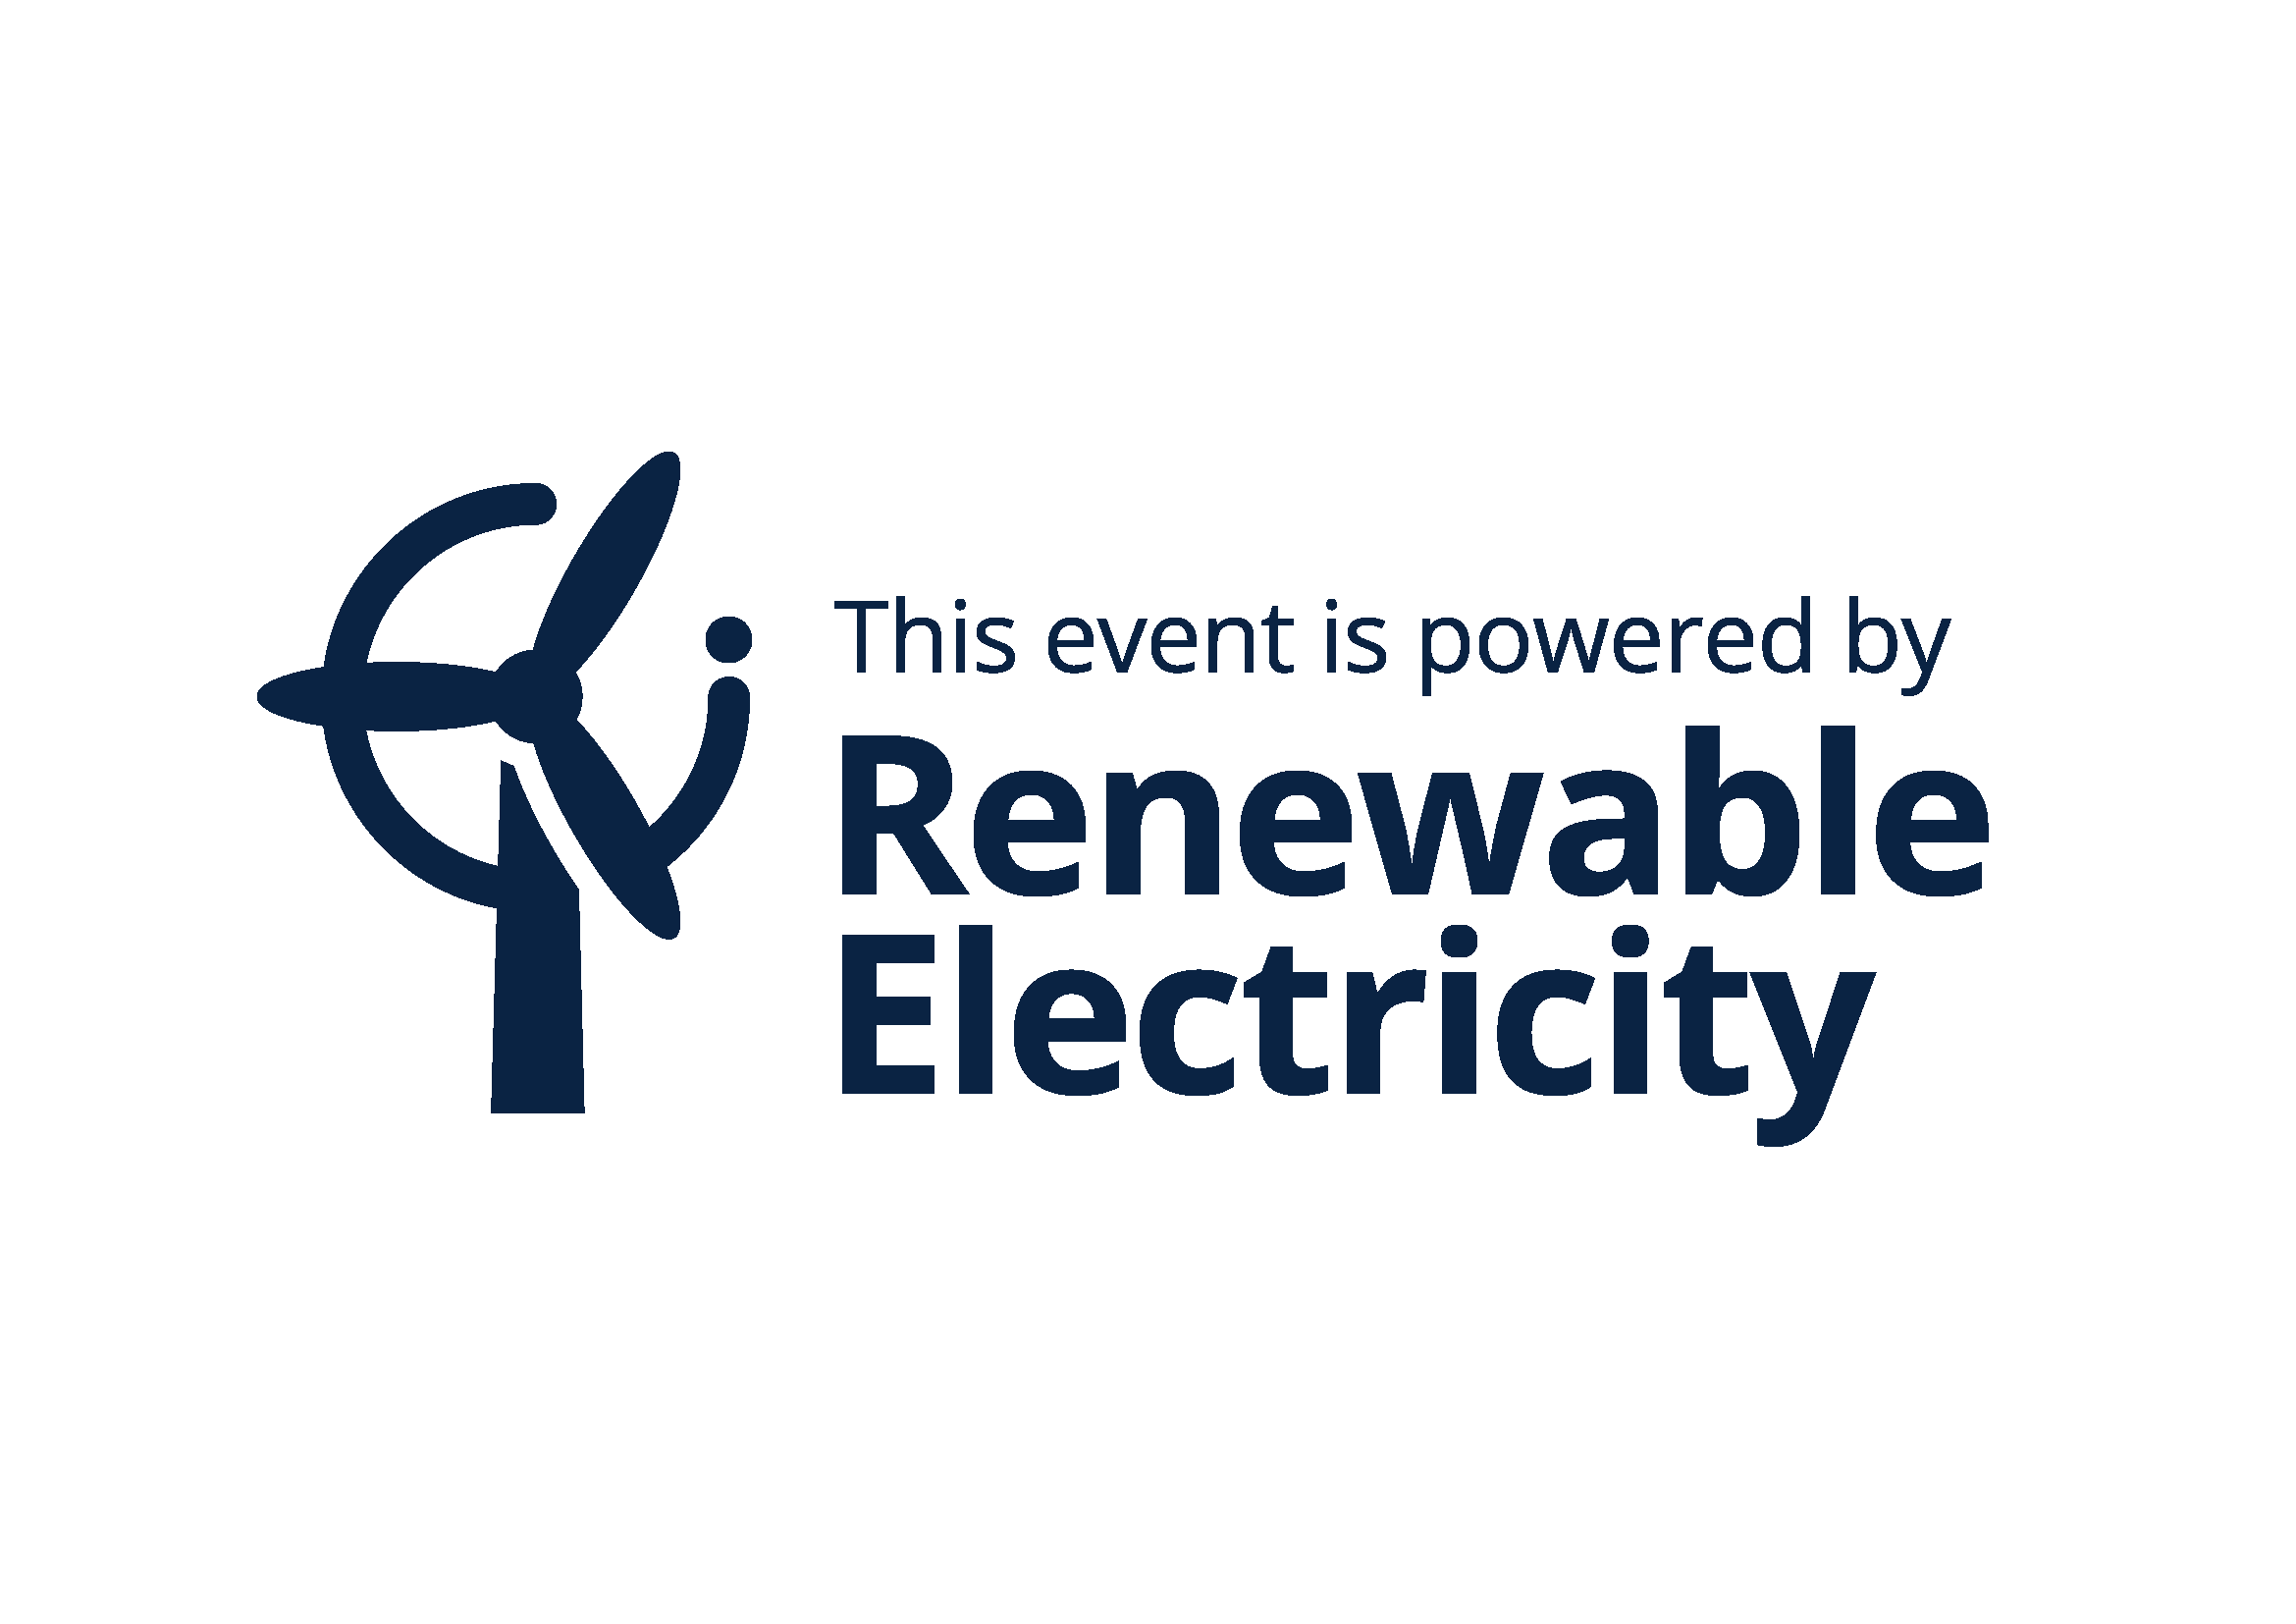 Renewable-electricity-event.png